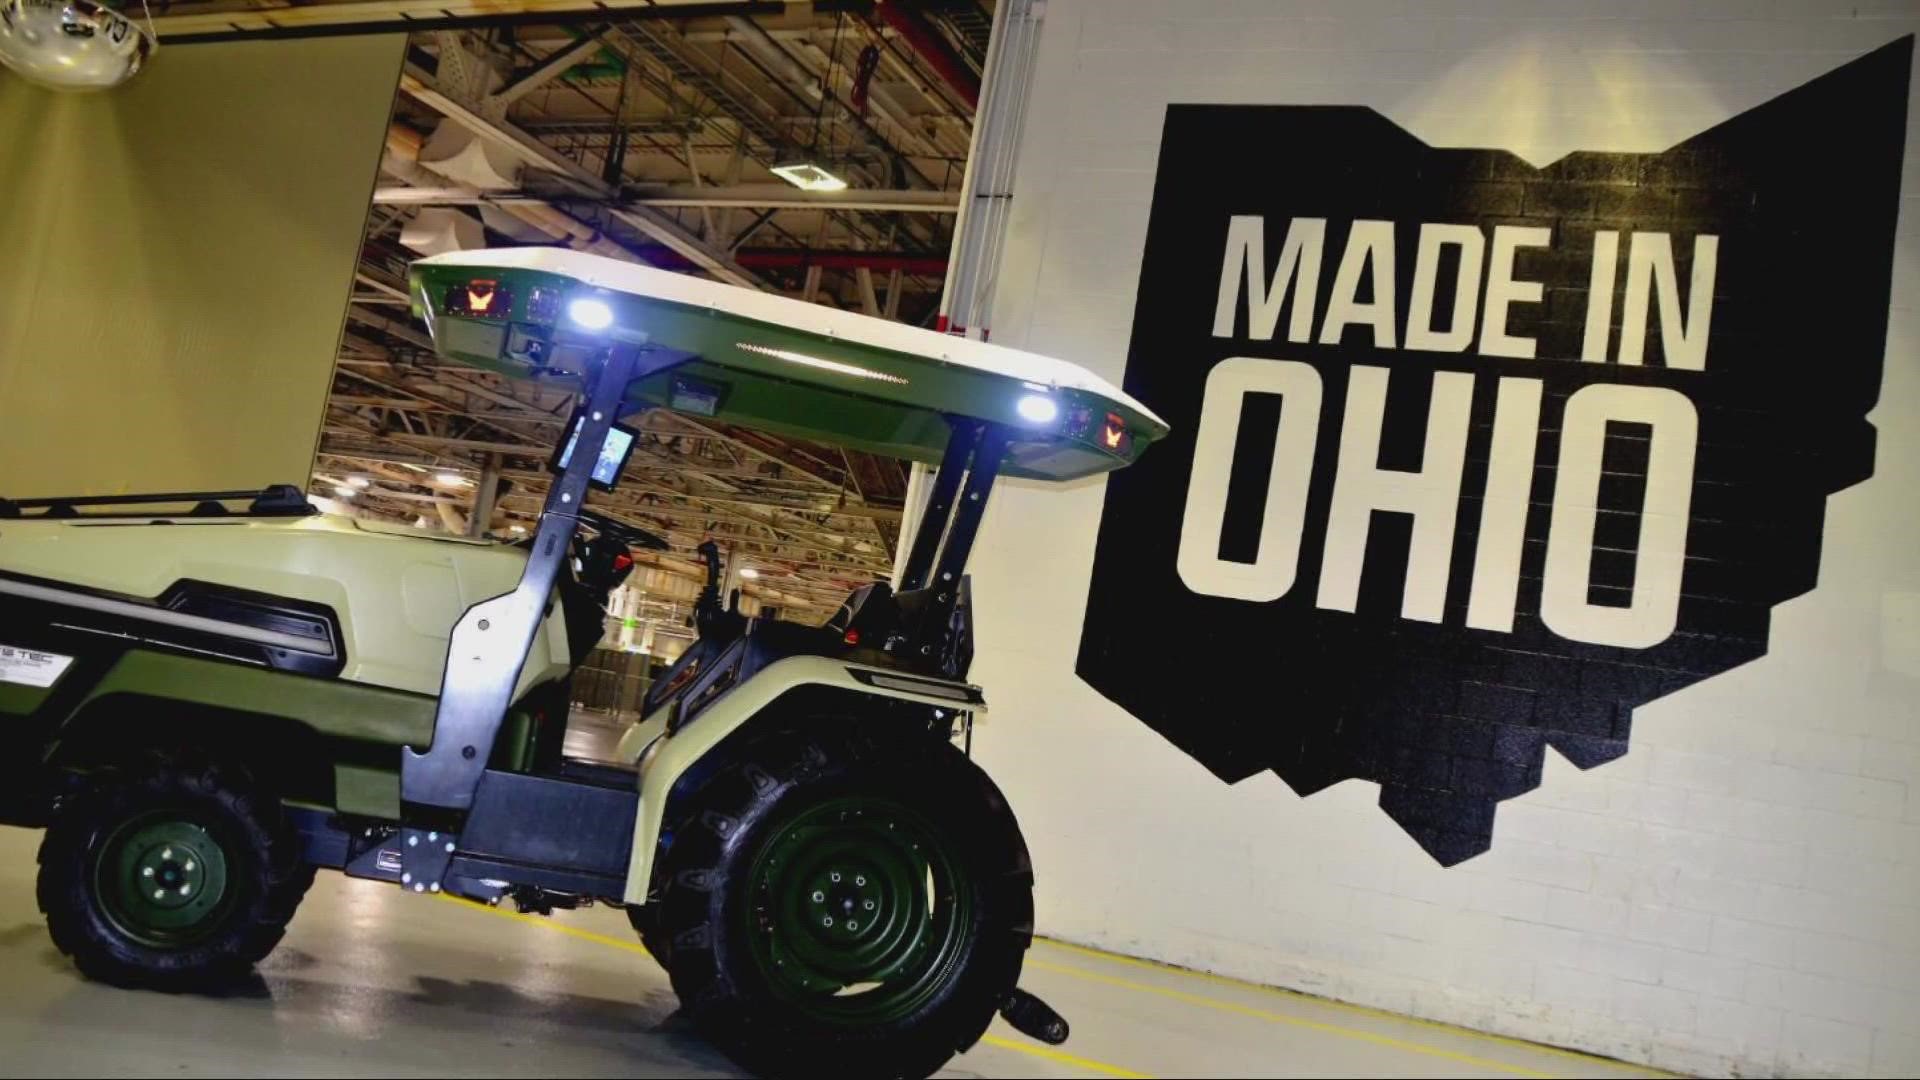 Gov. Mike DeWine said the state is working to get the plant built in Ohio.